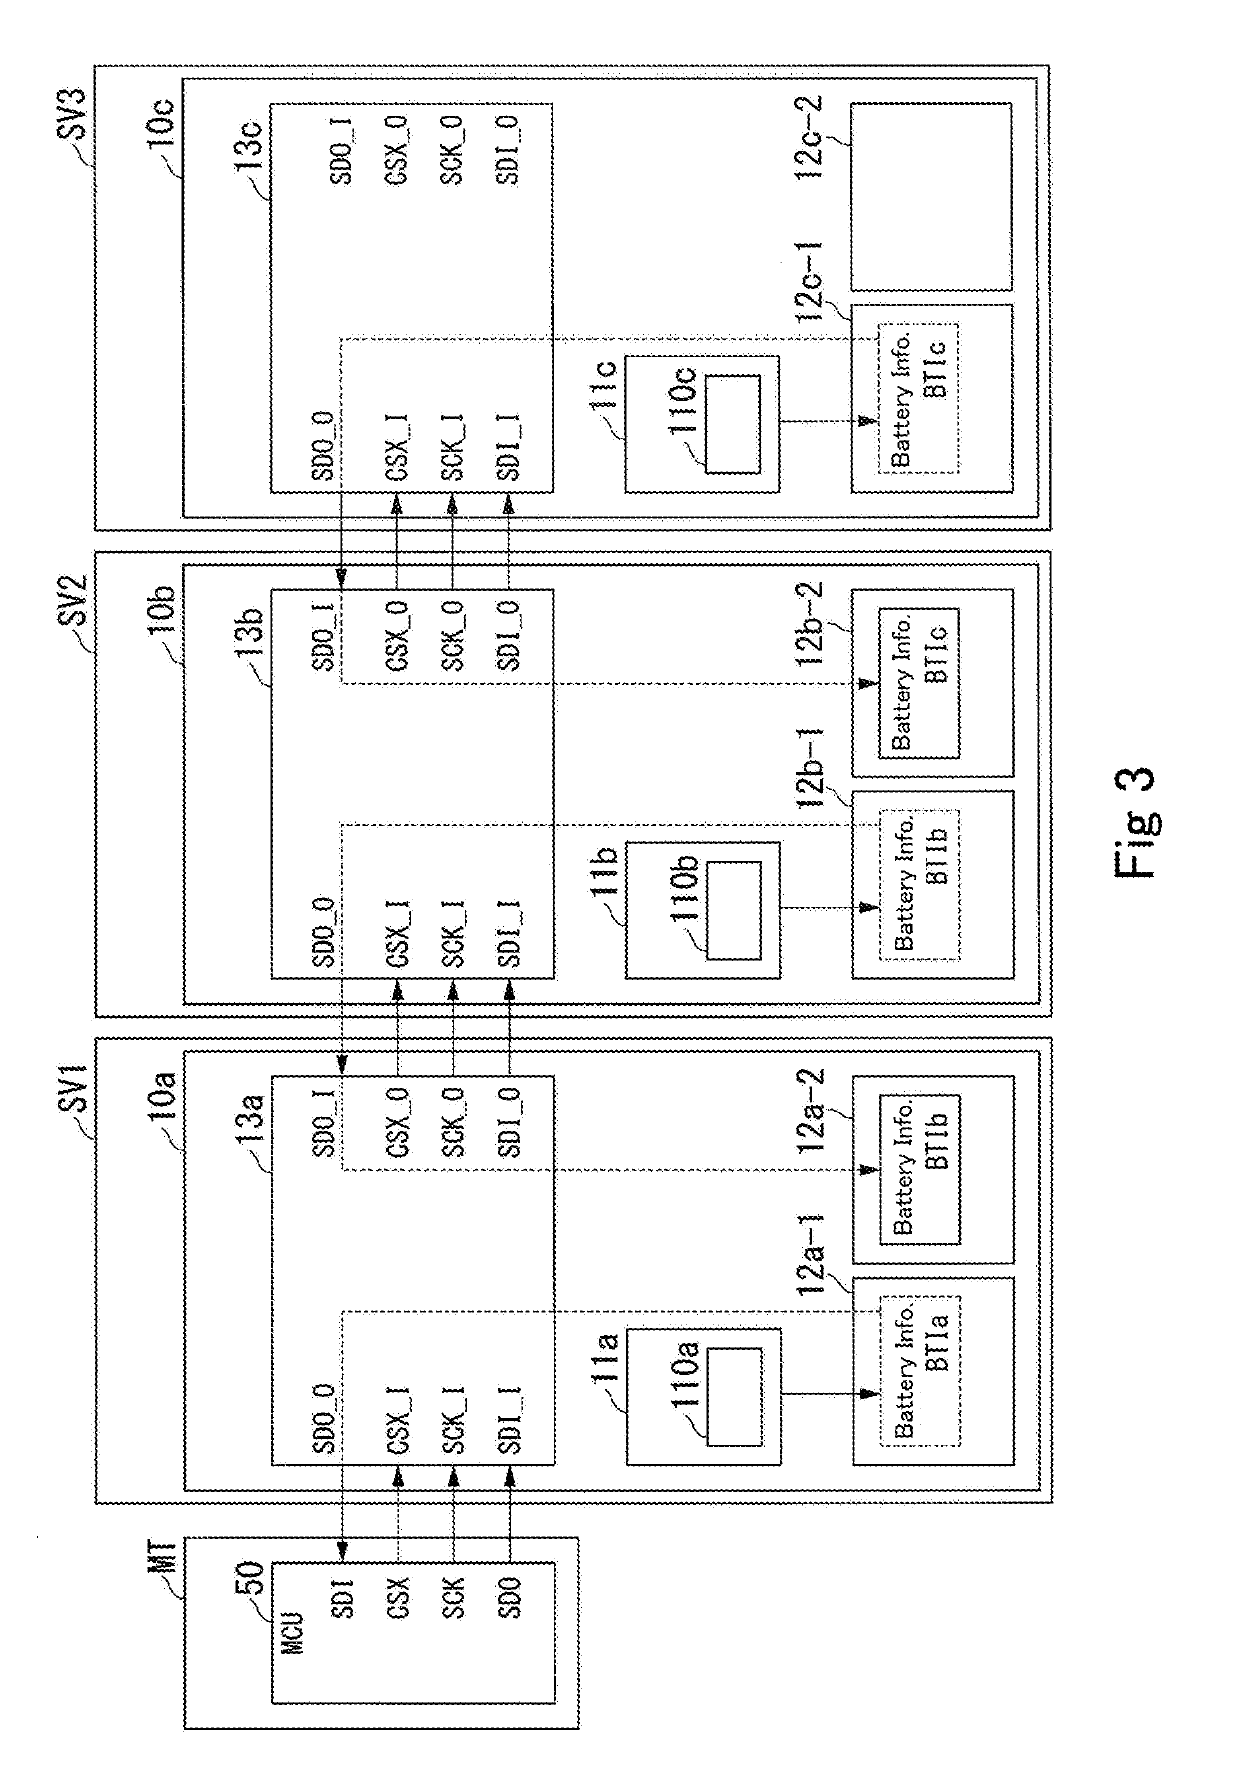 Battery protection integrated circuit and battery management system